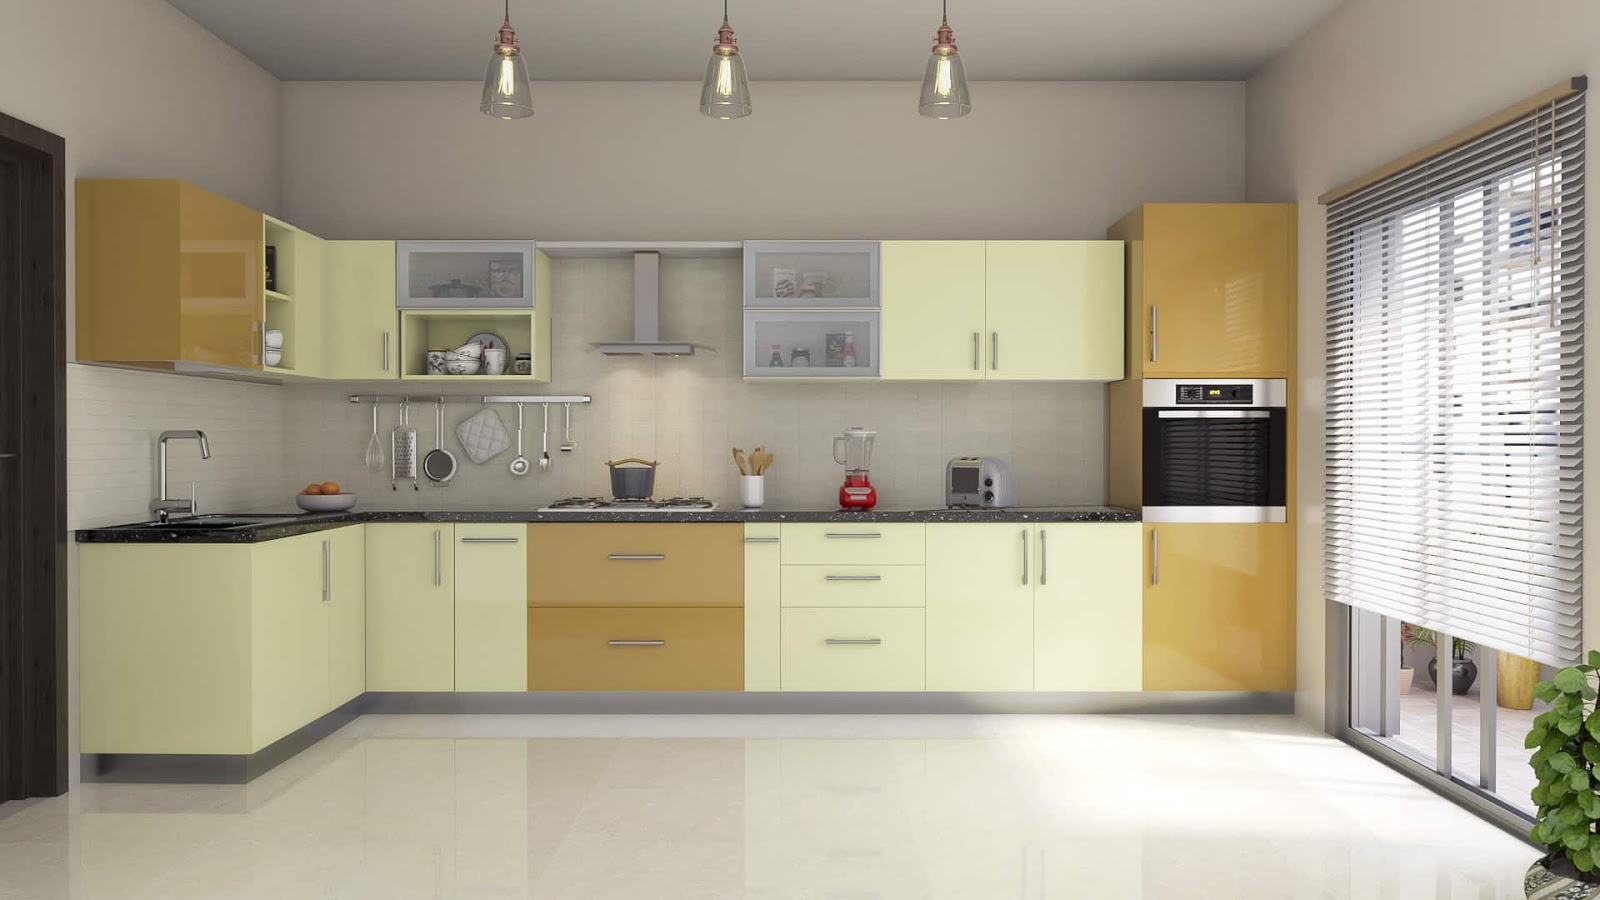 100 modular indian kitchen designs, ideas, colors, cabinets